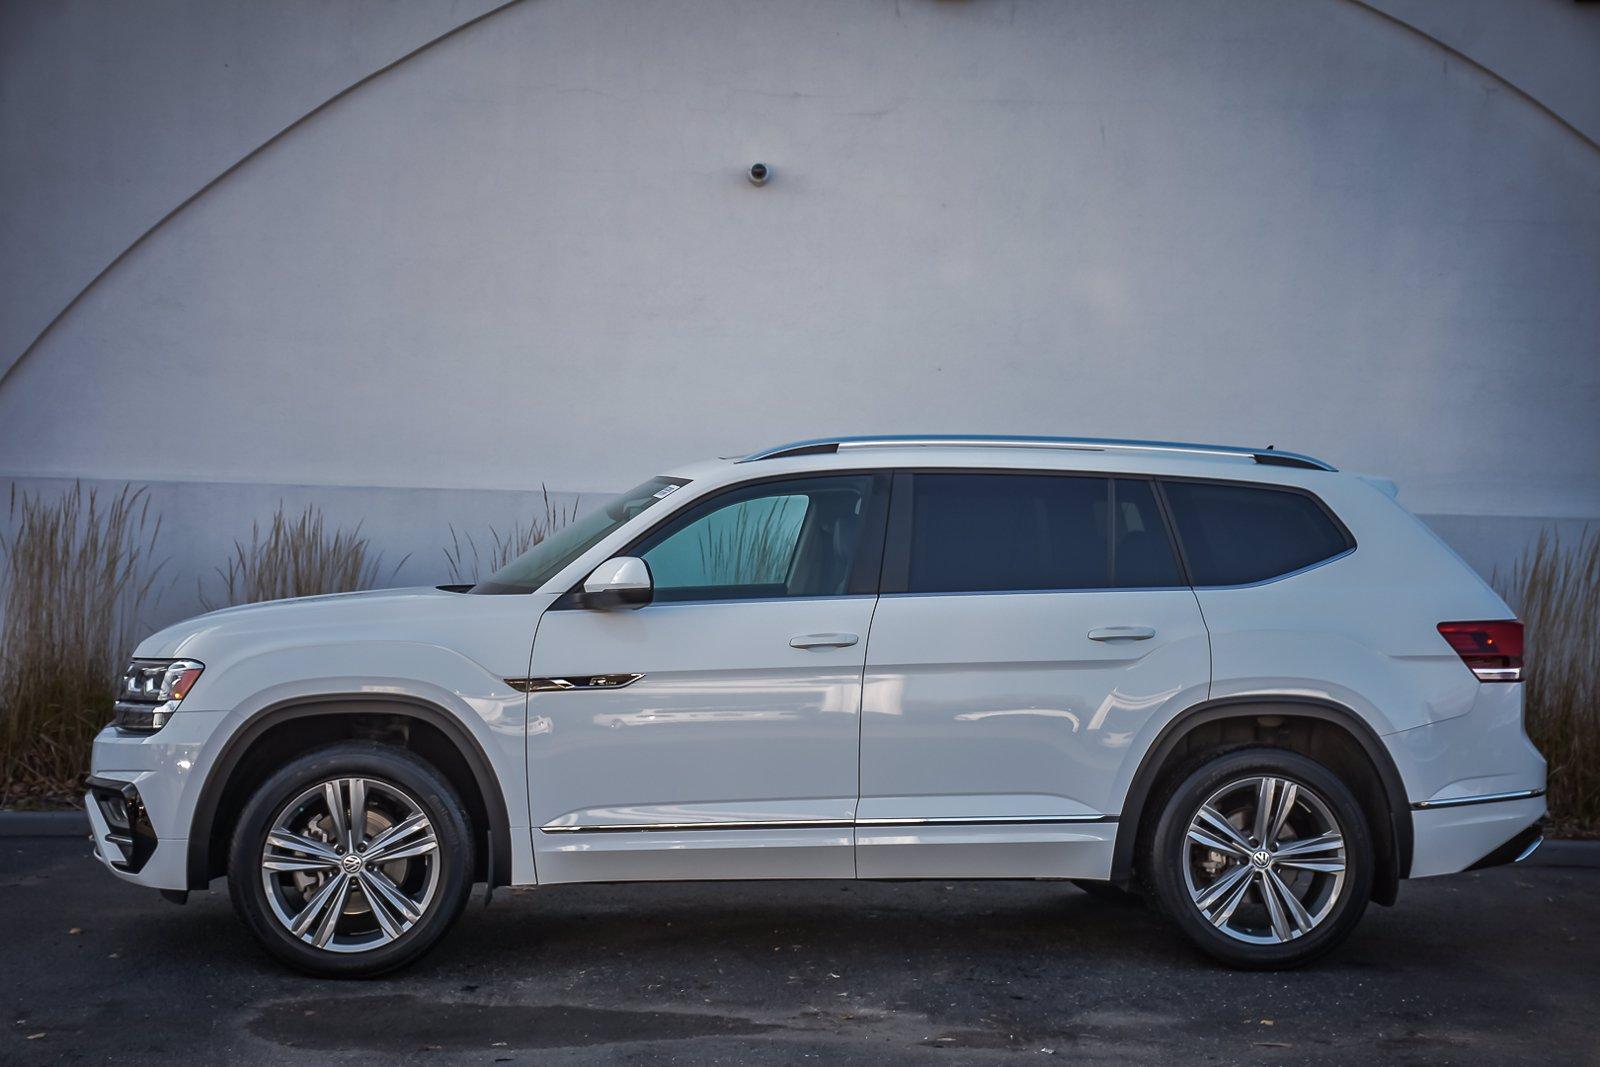 Used 2019 Volkswagen Atlas 3.6L V6 SEL R-Line, 3rd Row, | Downers Grove, IL